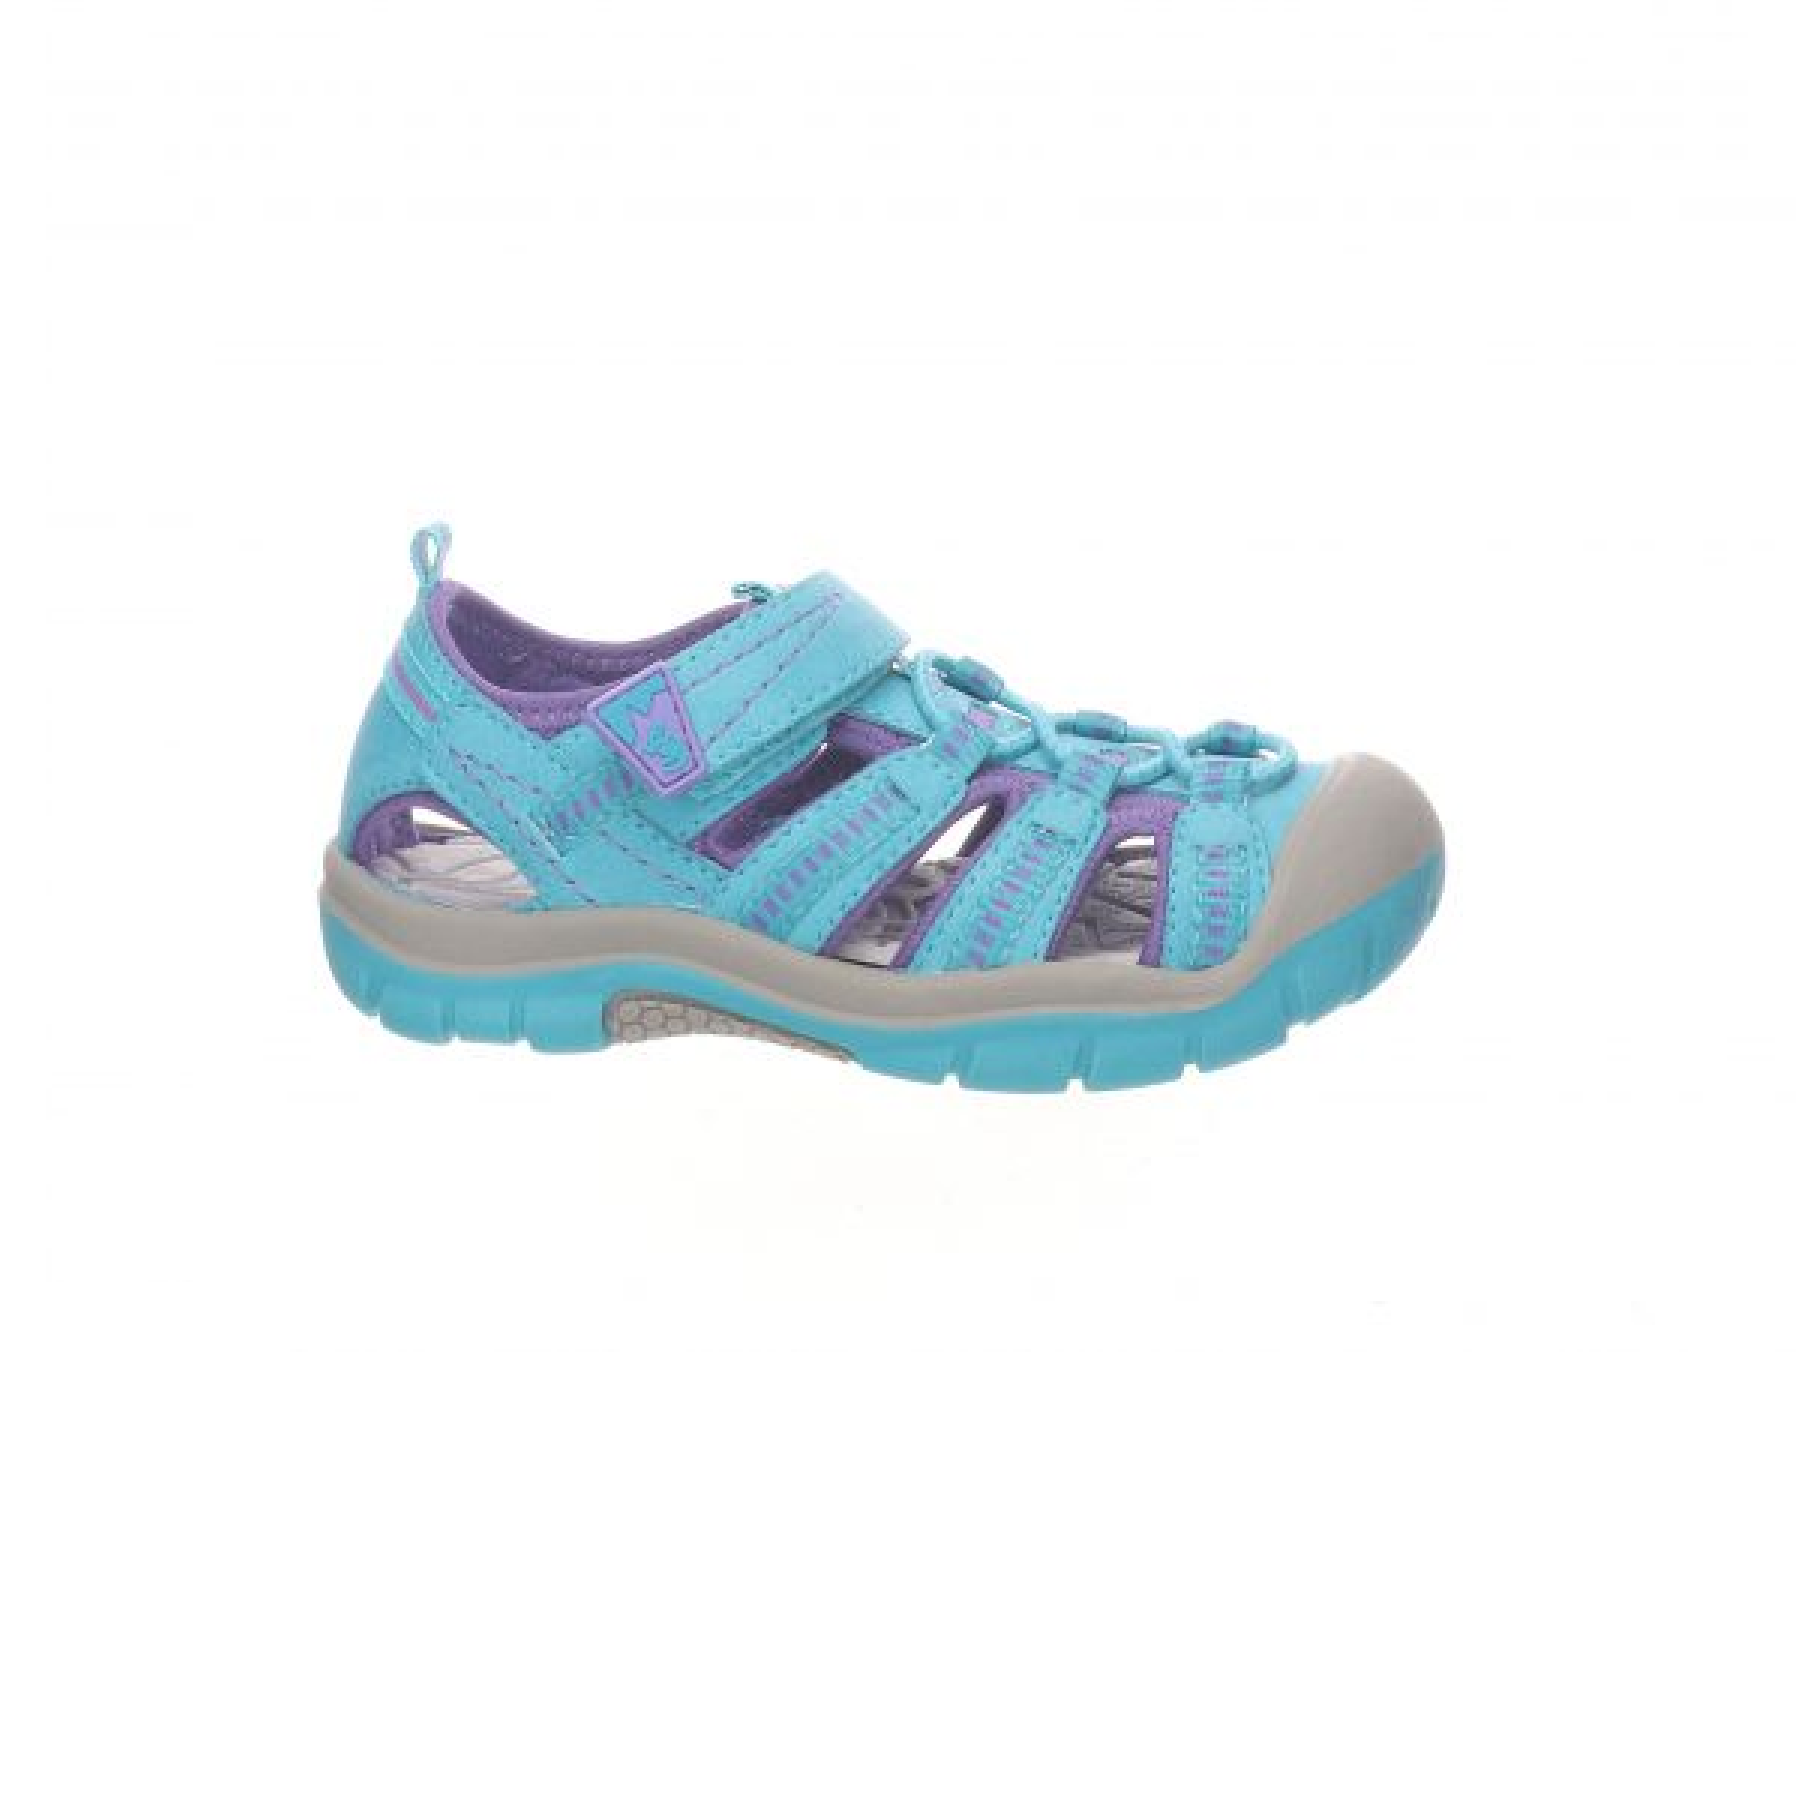 - Chicas GIRLS & – 33/21610/40 TURQUOISE - PETE SHOES/SANDALS Chicos LURCHI - OPEN Shoes